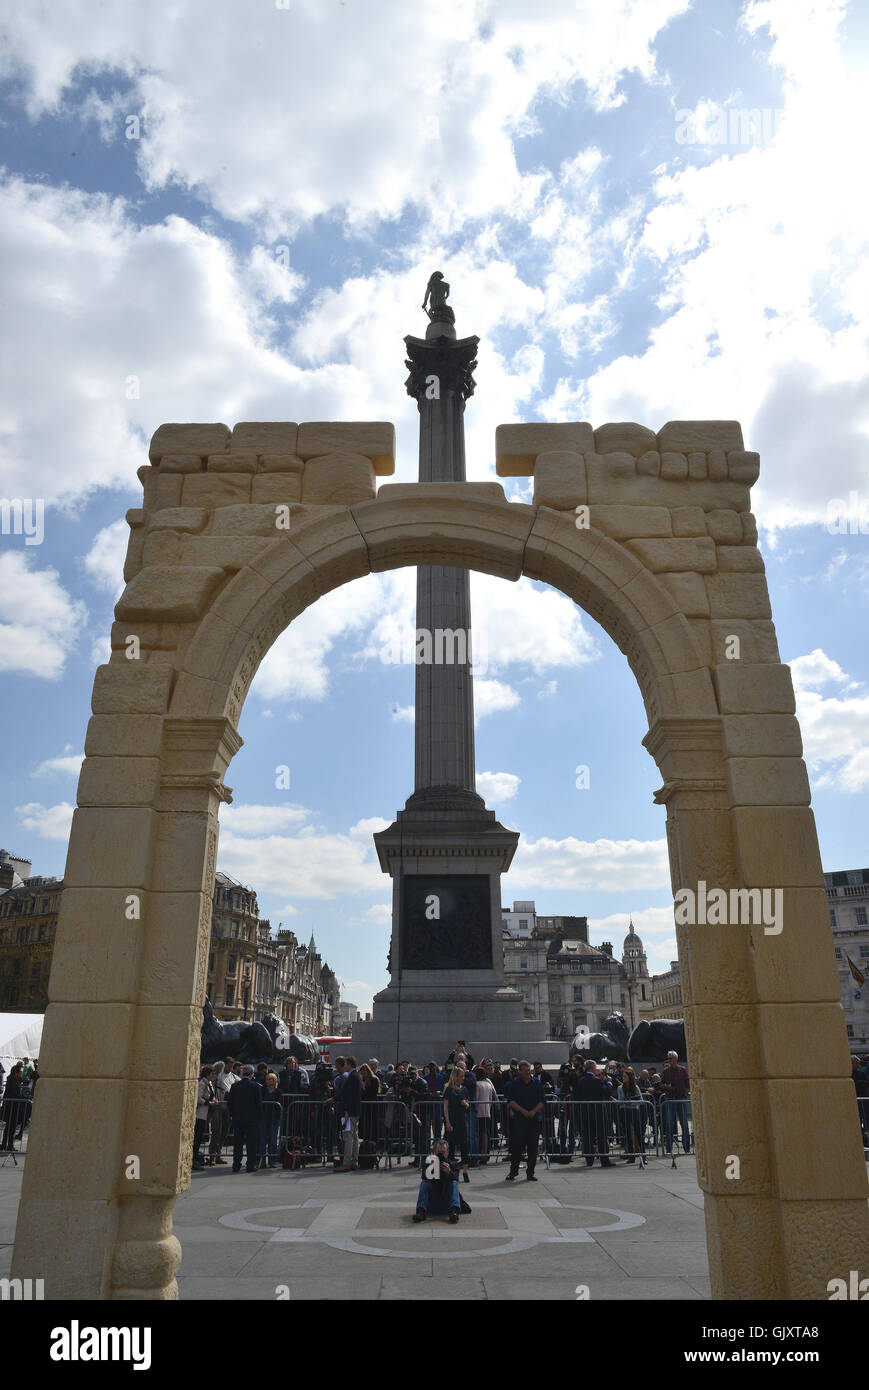 A 15 metre high replica of the Arch of Triumph is erected in Trafalgar Square to coincide with UNESCO’s World Heritage Week. The structure, created with a 3-D printer, is the project of The Institute of Digital Archaeology. The original Arch, in the city Stock Photo